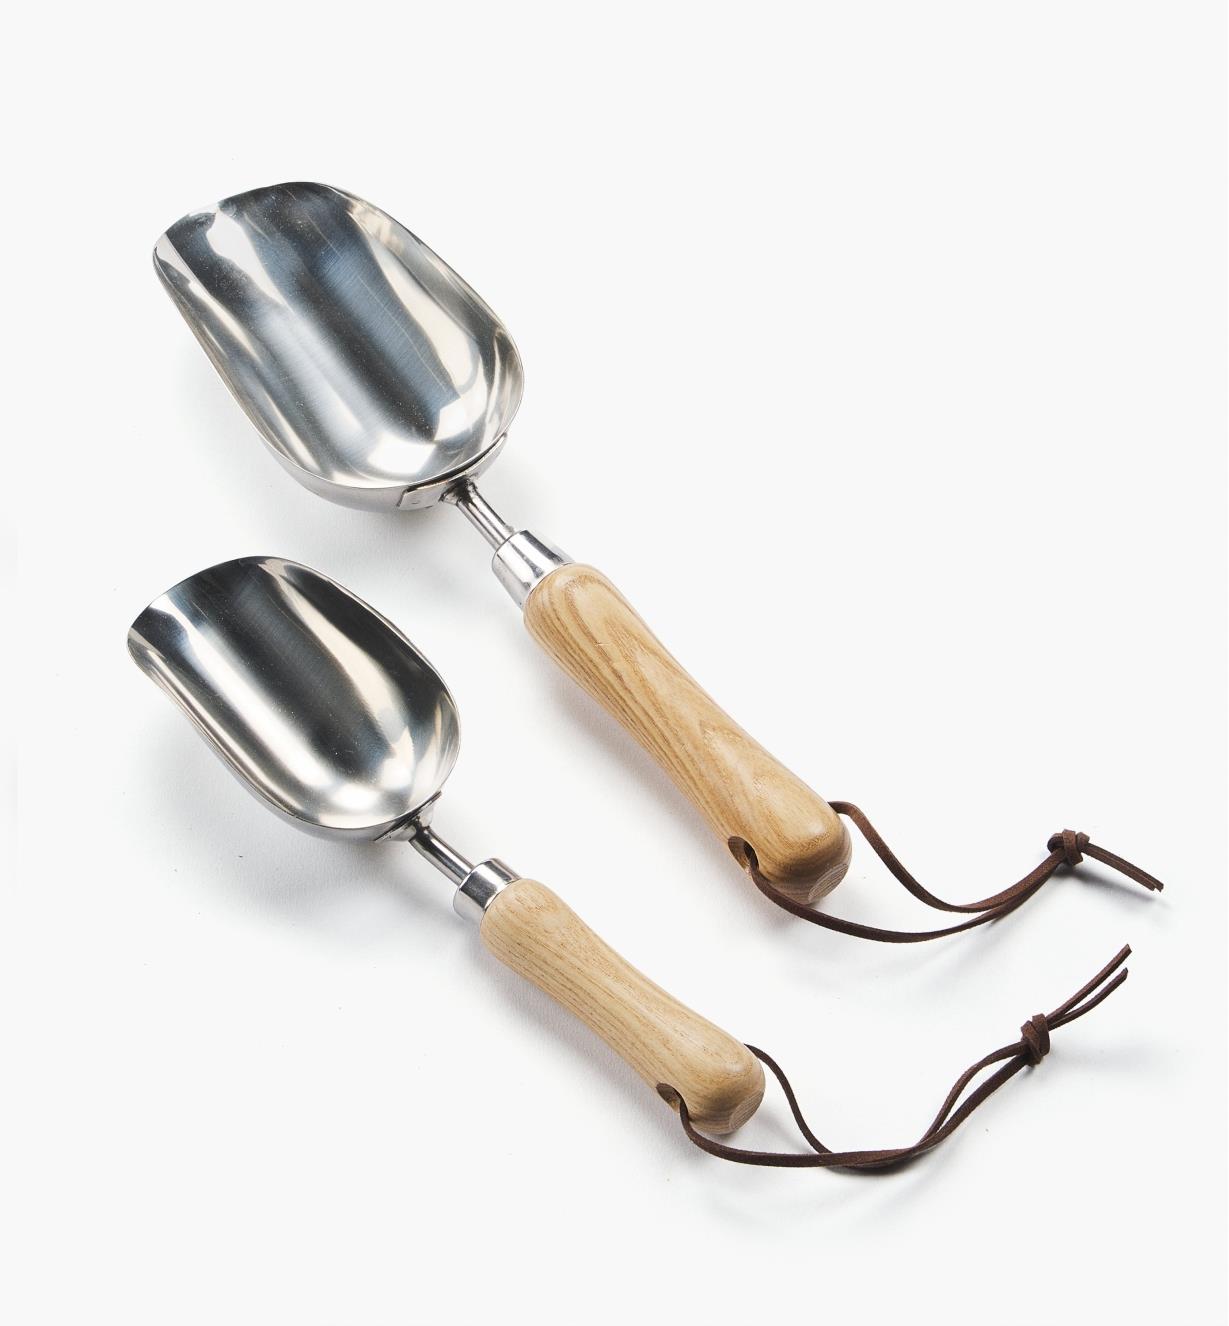 AD524 - Set of 2 Stainless-Steel Scoops